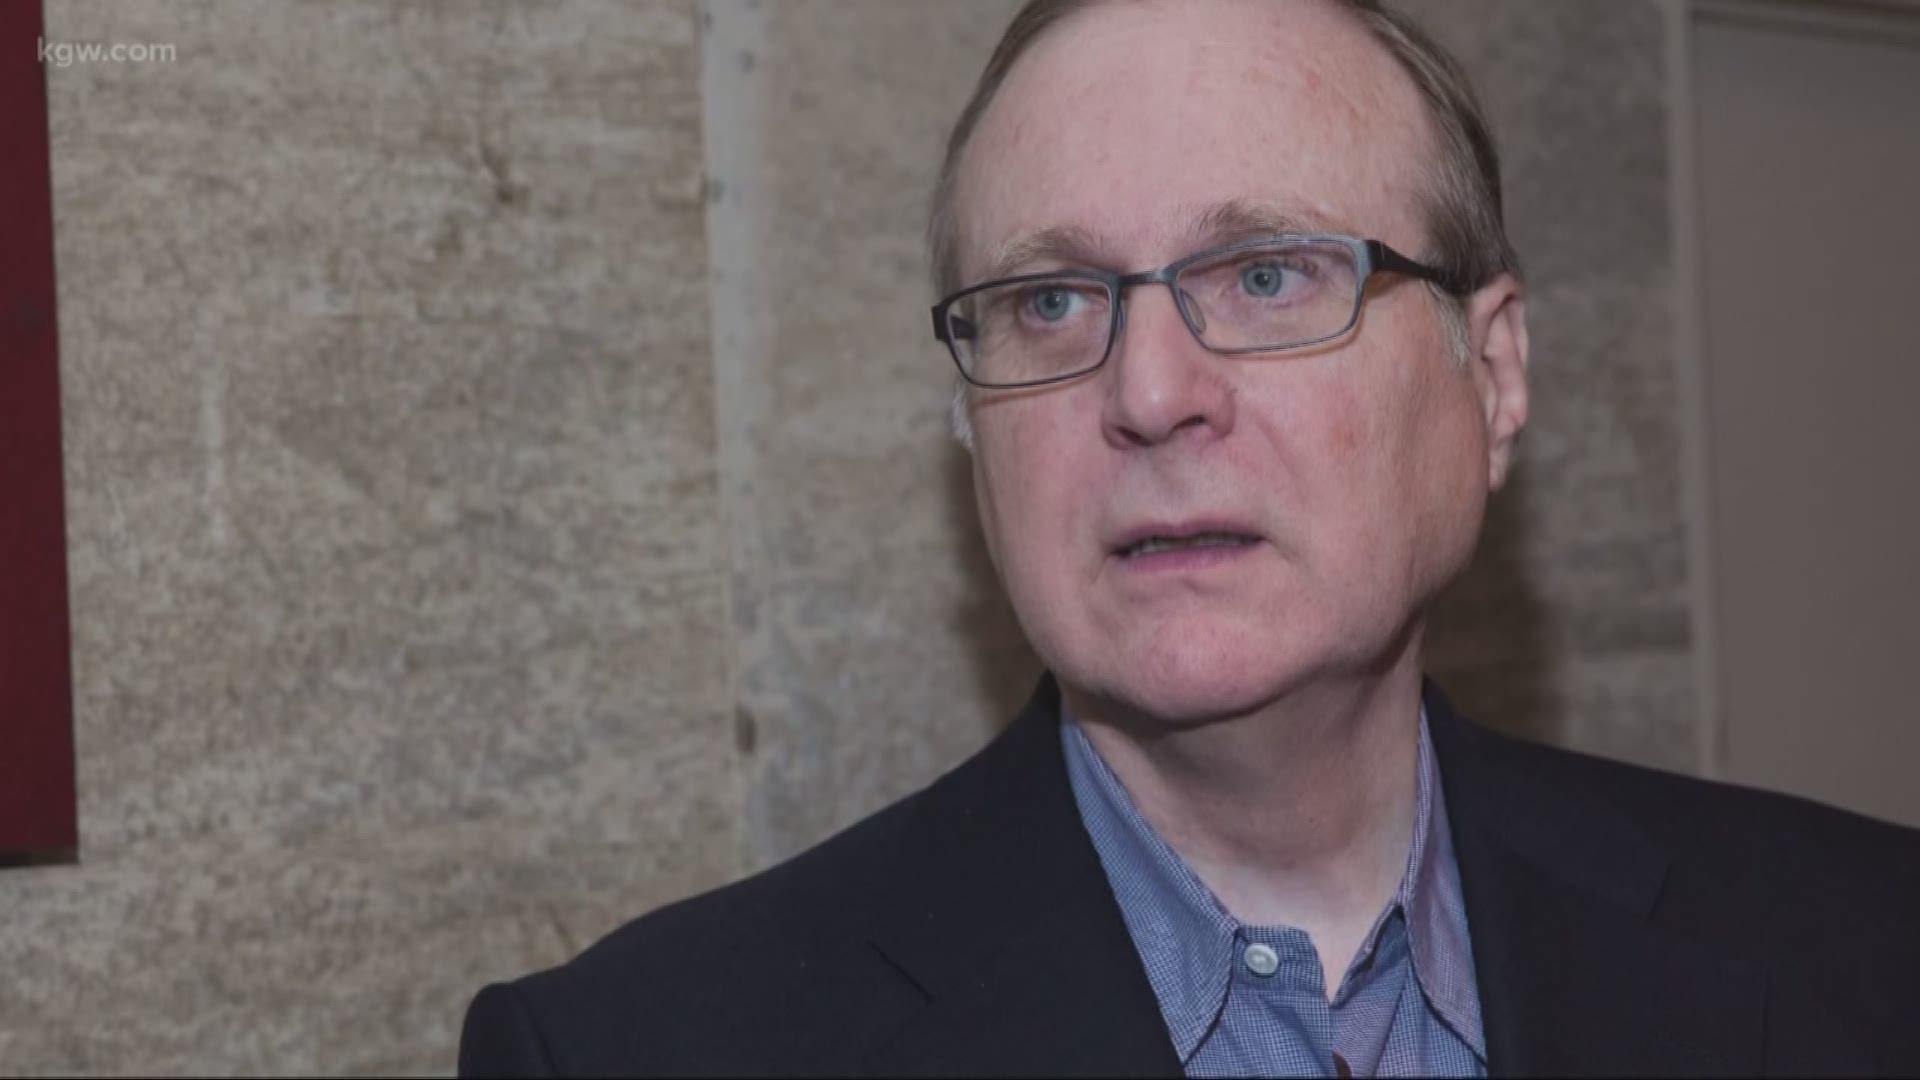 Youtube: A look at the life and legacy of Paul Allen.
News, local